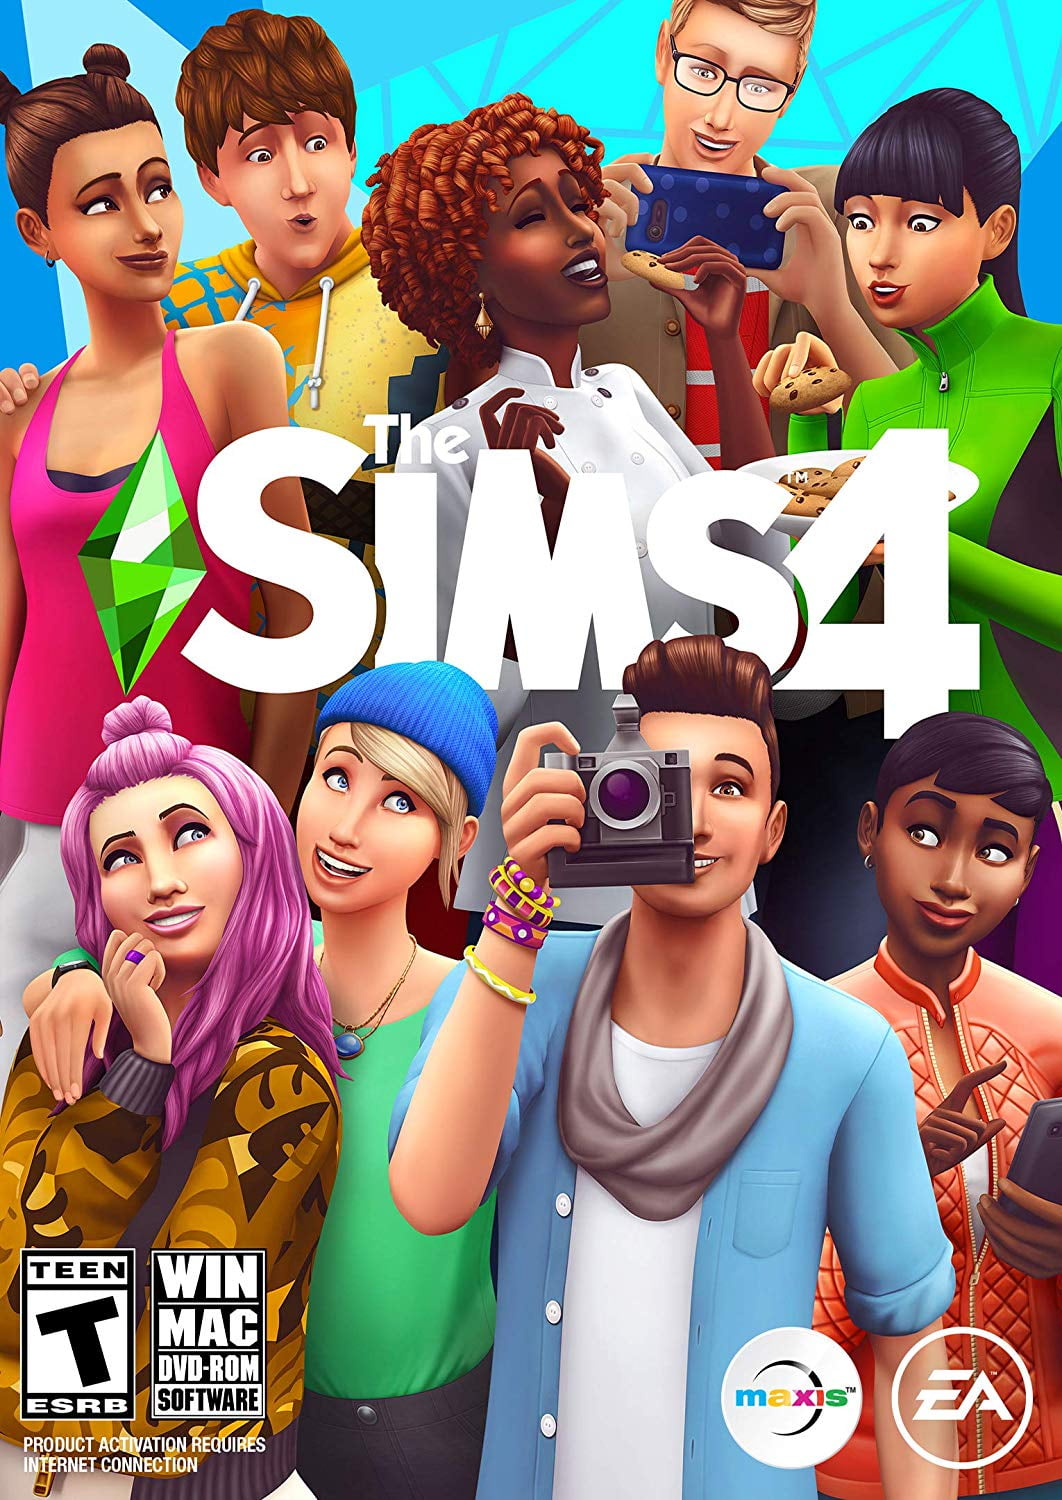 The Sims 4 Deluxe Edition Free Download - IPC Games